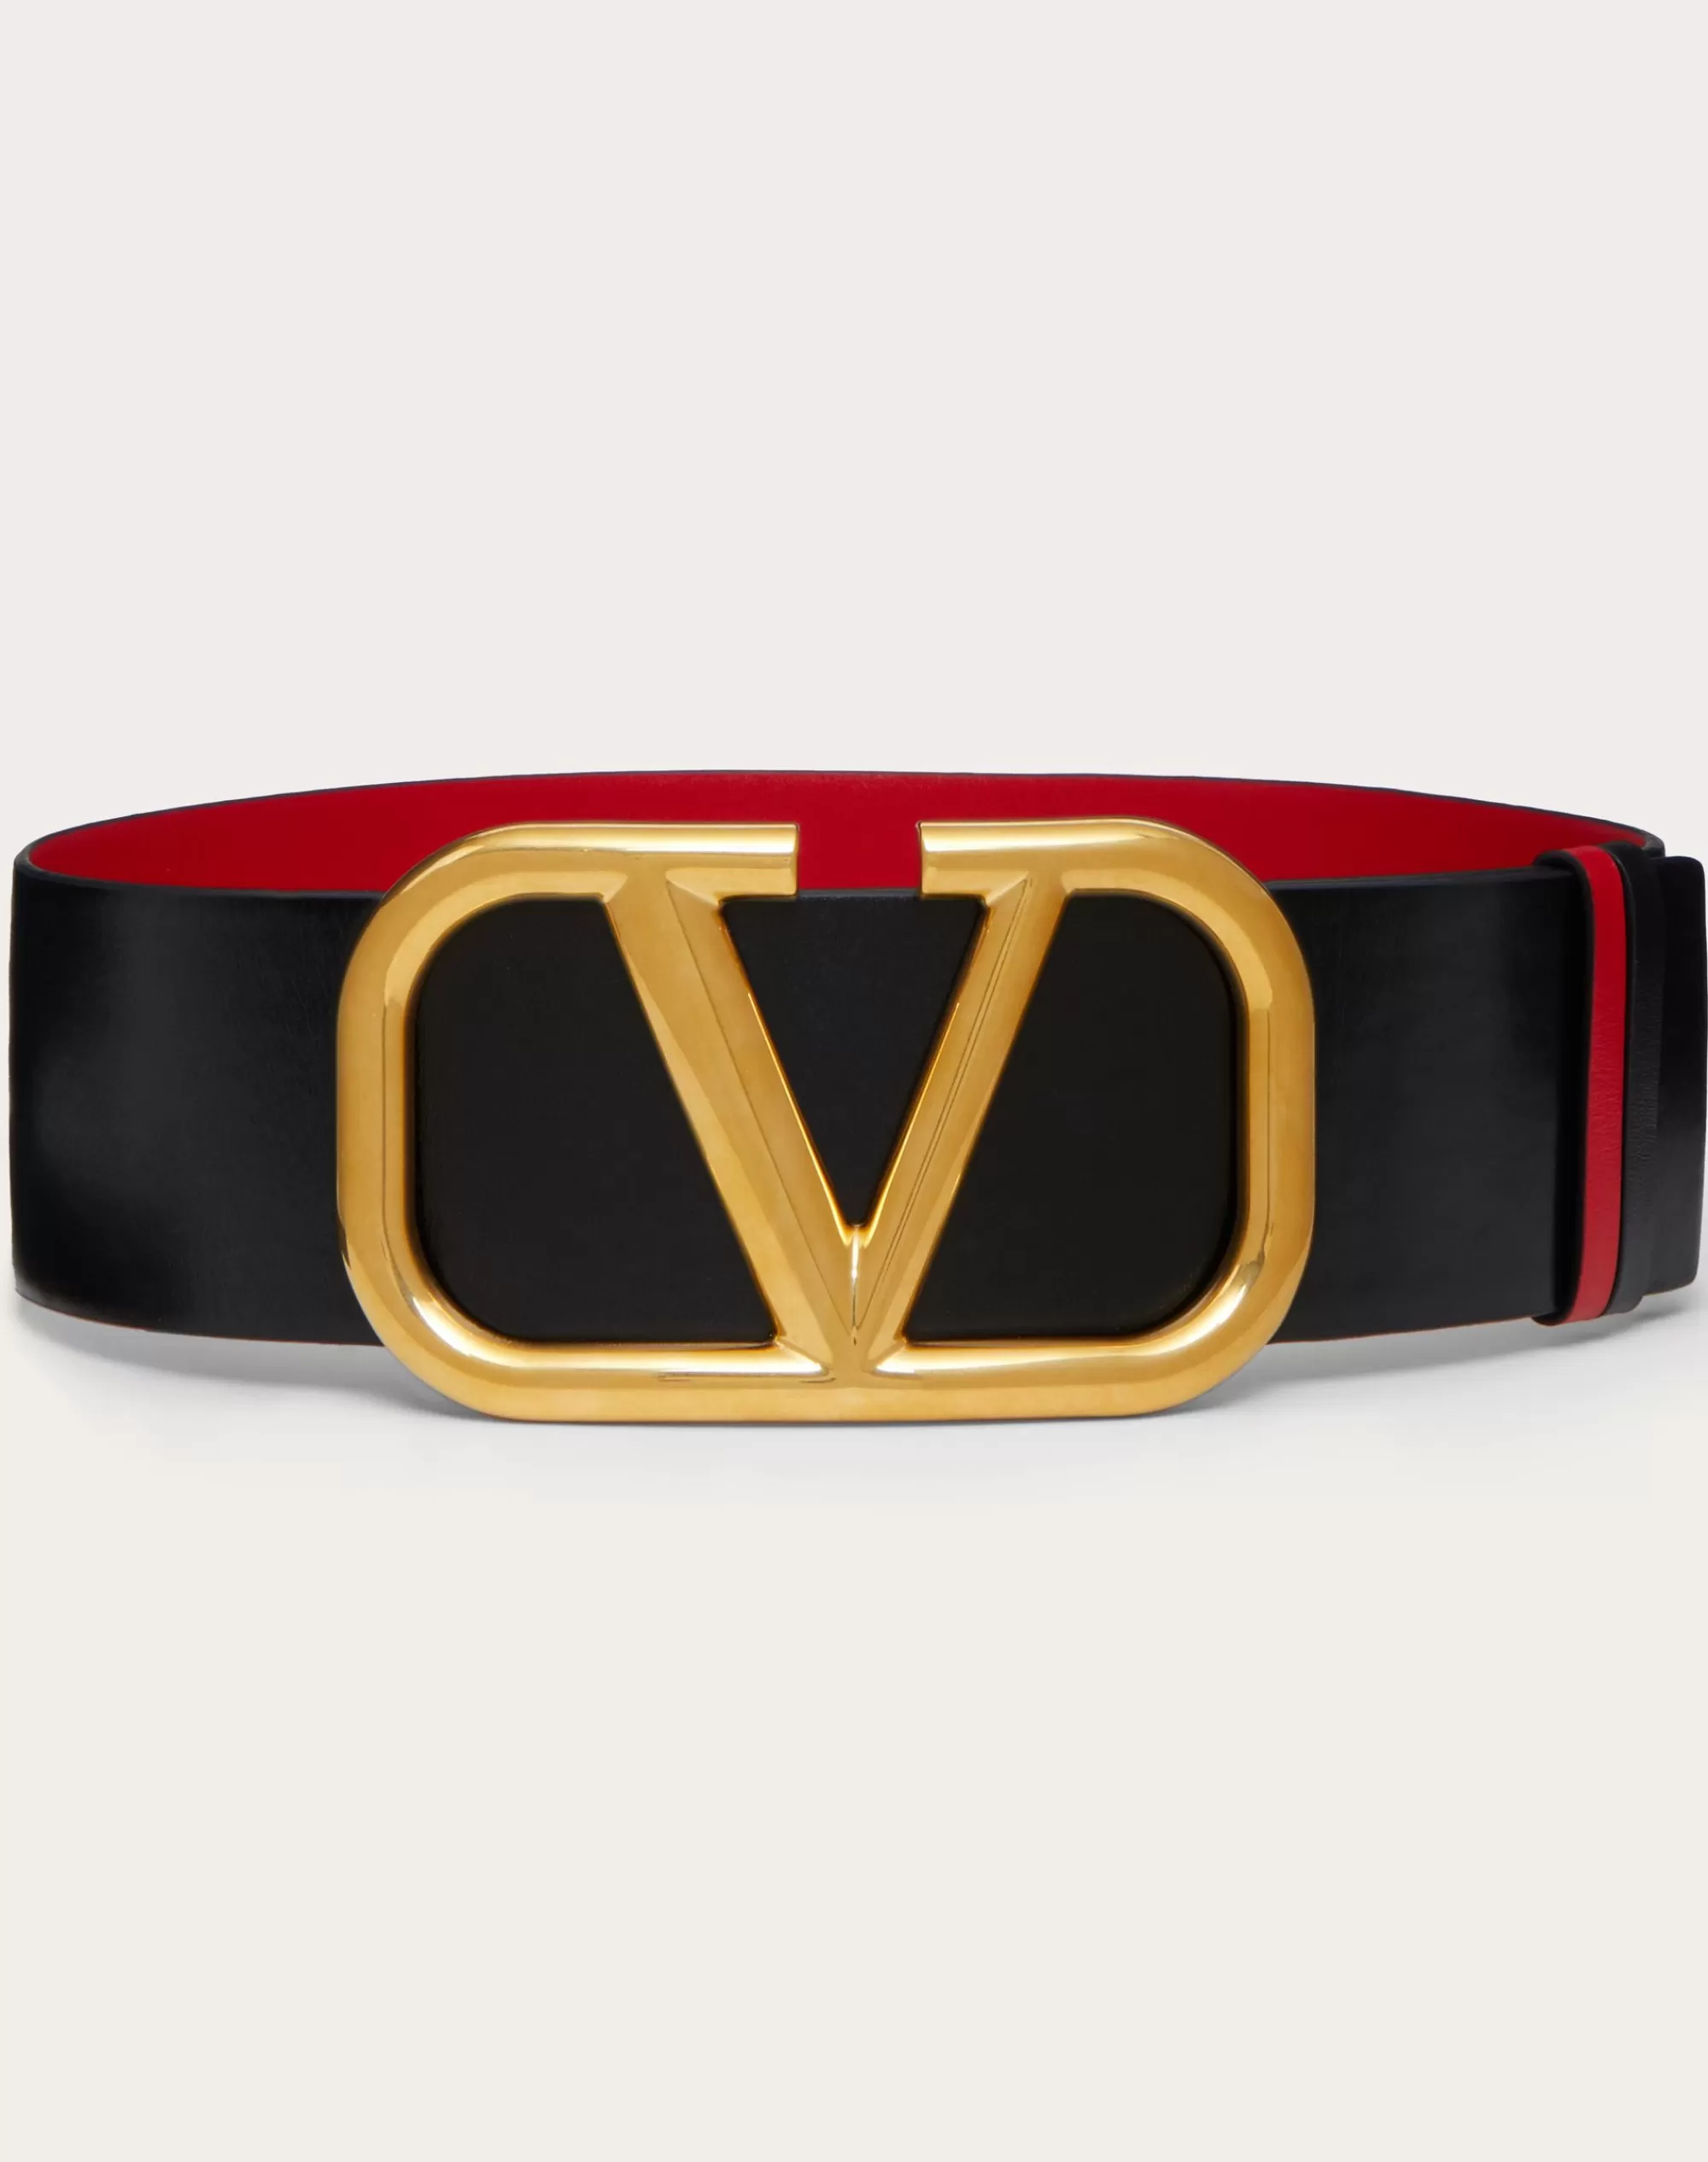 Valentino REVERSIBLE VLOGO SIGNATURE BELT IN GLOSSY CALFSKIN 70 MM Clearance